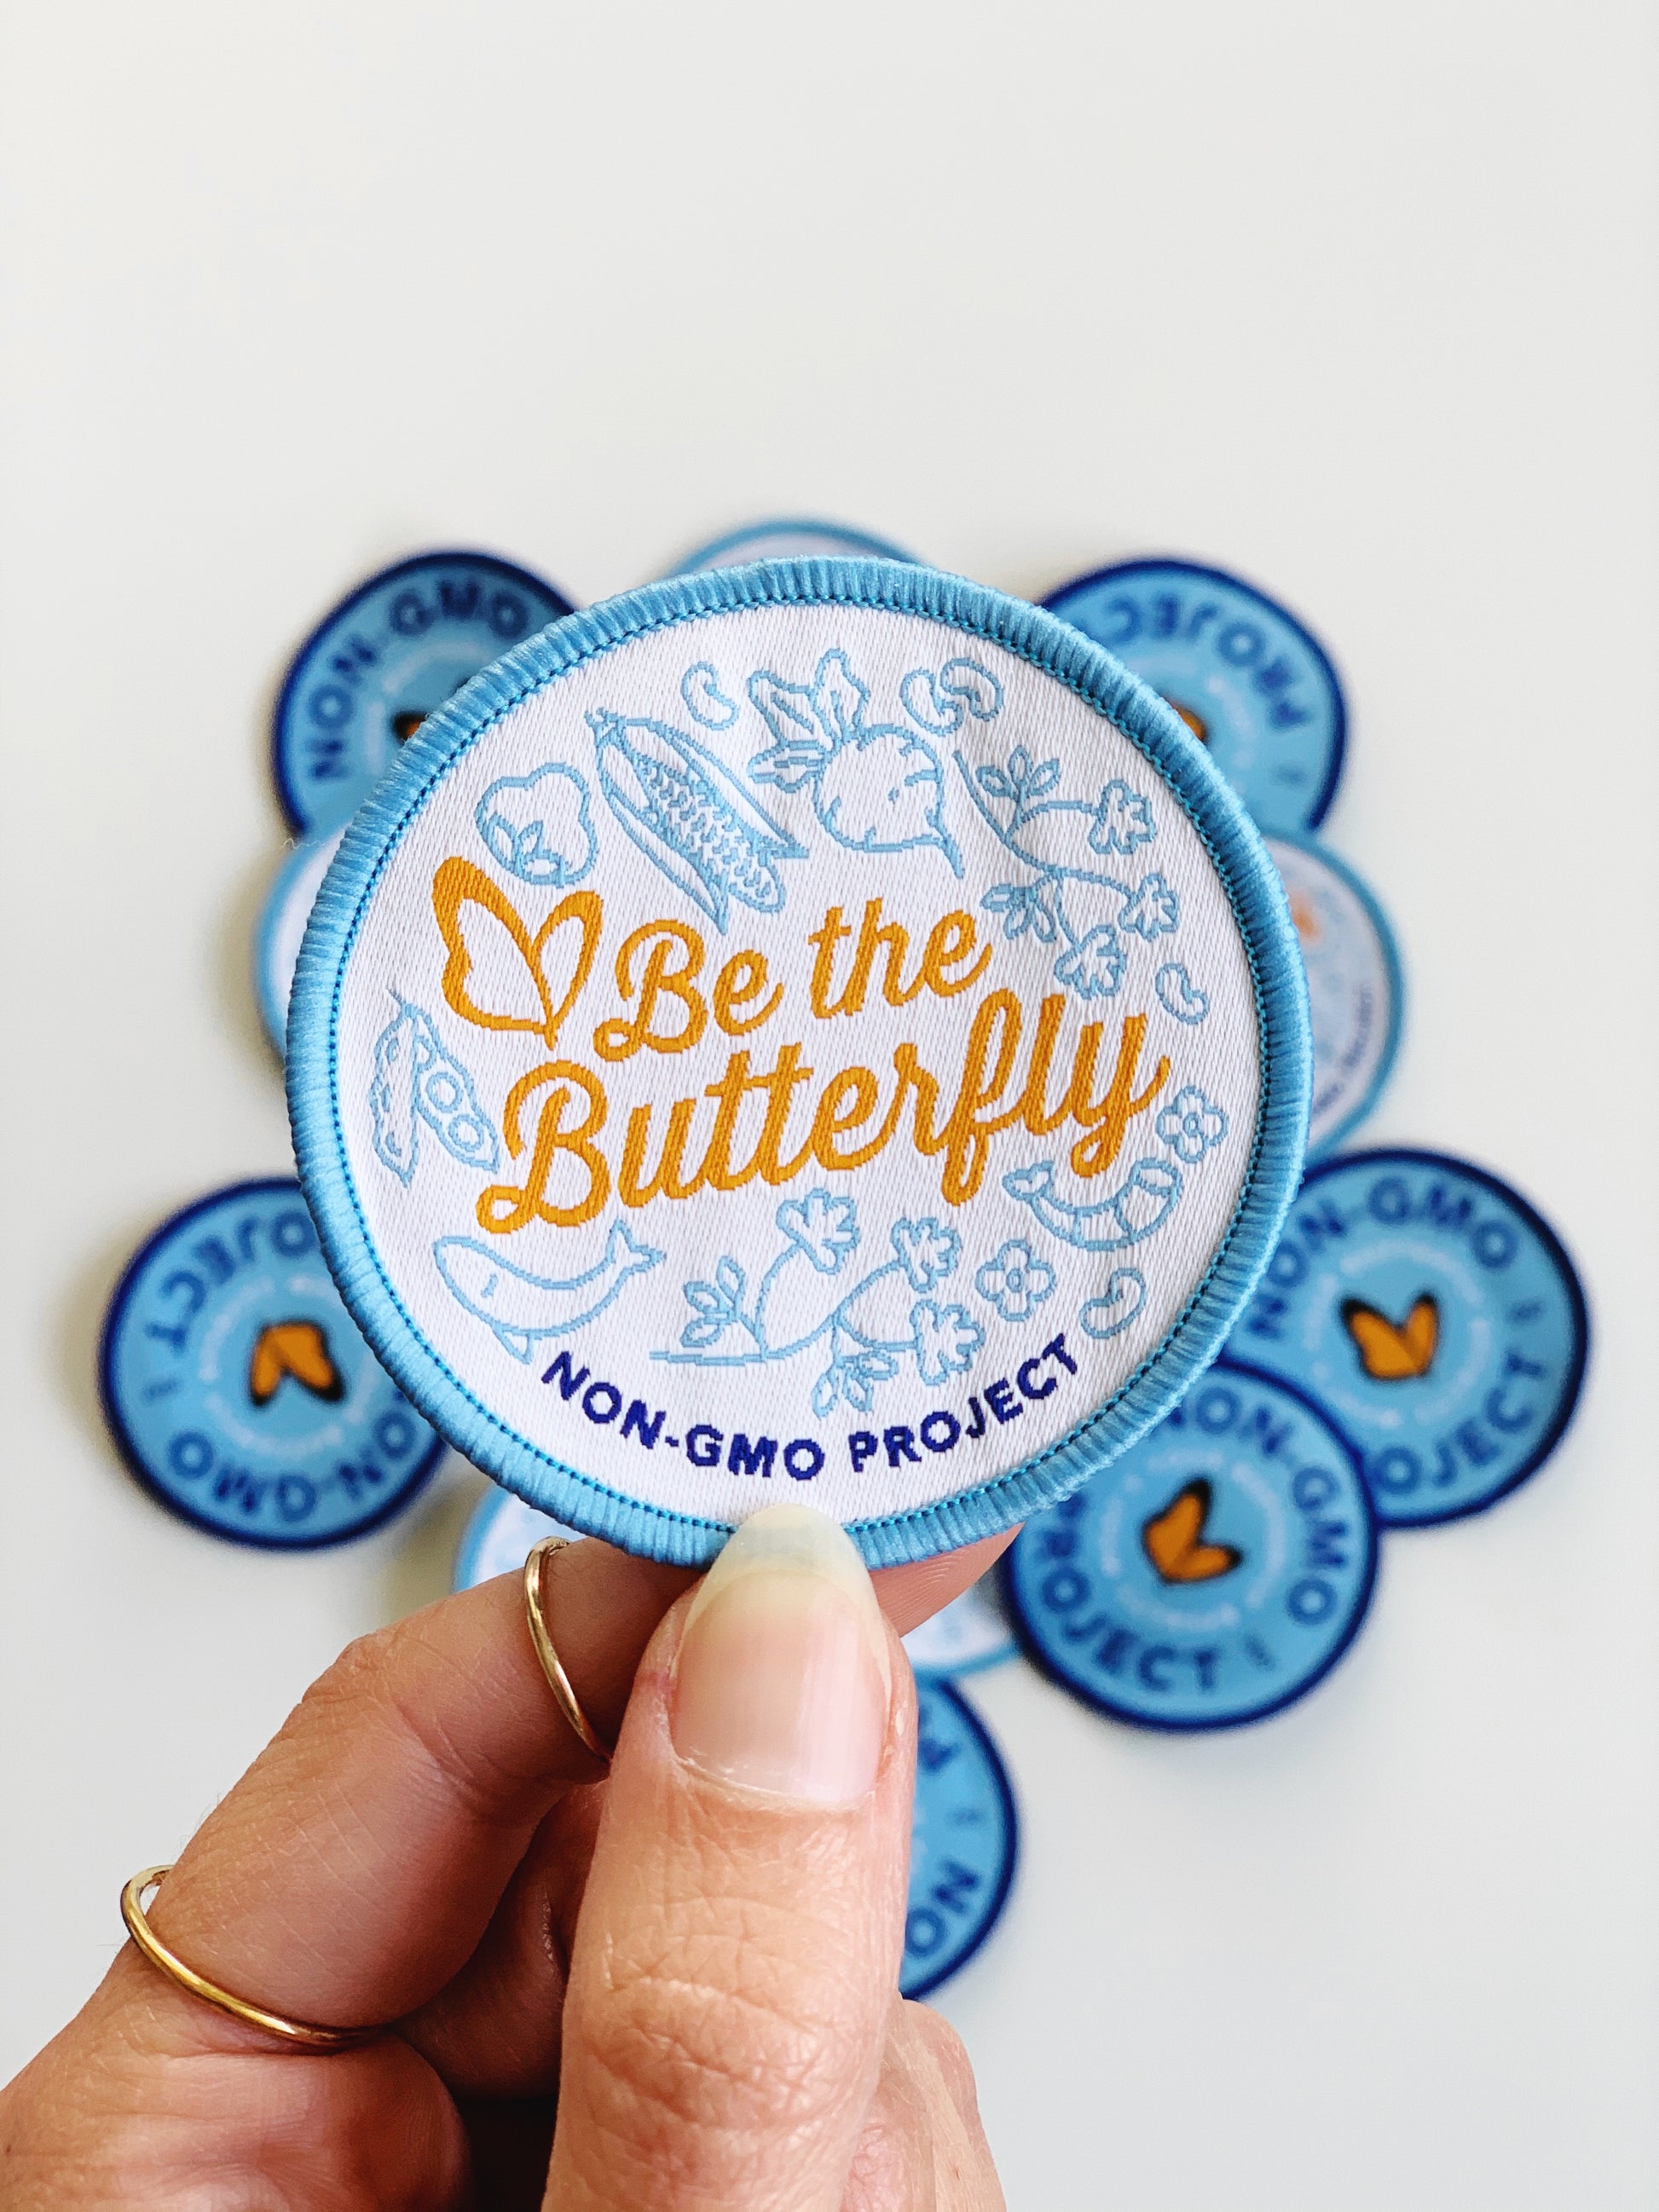 Non-GMO Project "Be the Butterfly" light blue, white, and orange woven patch, with a pile of patches in the background